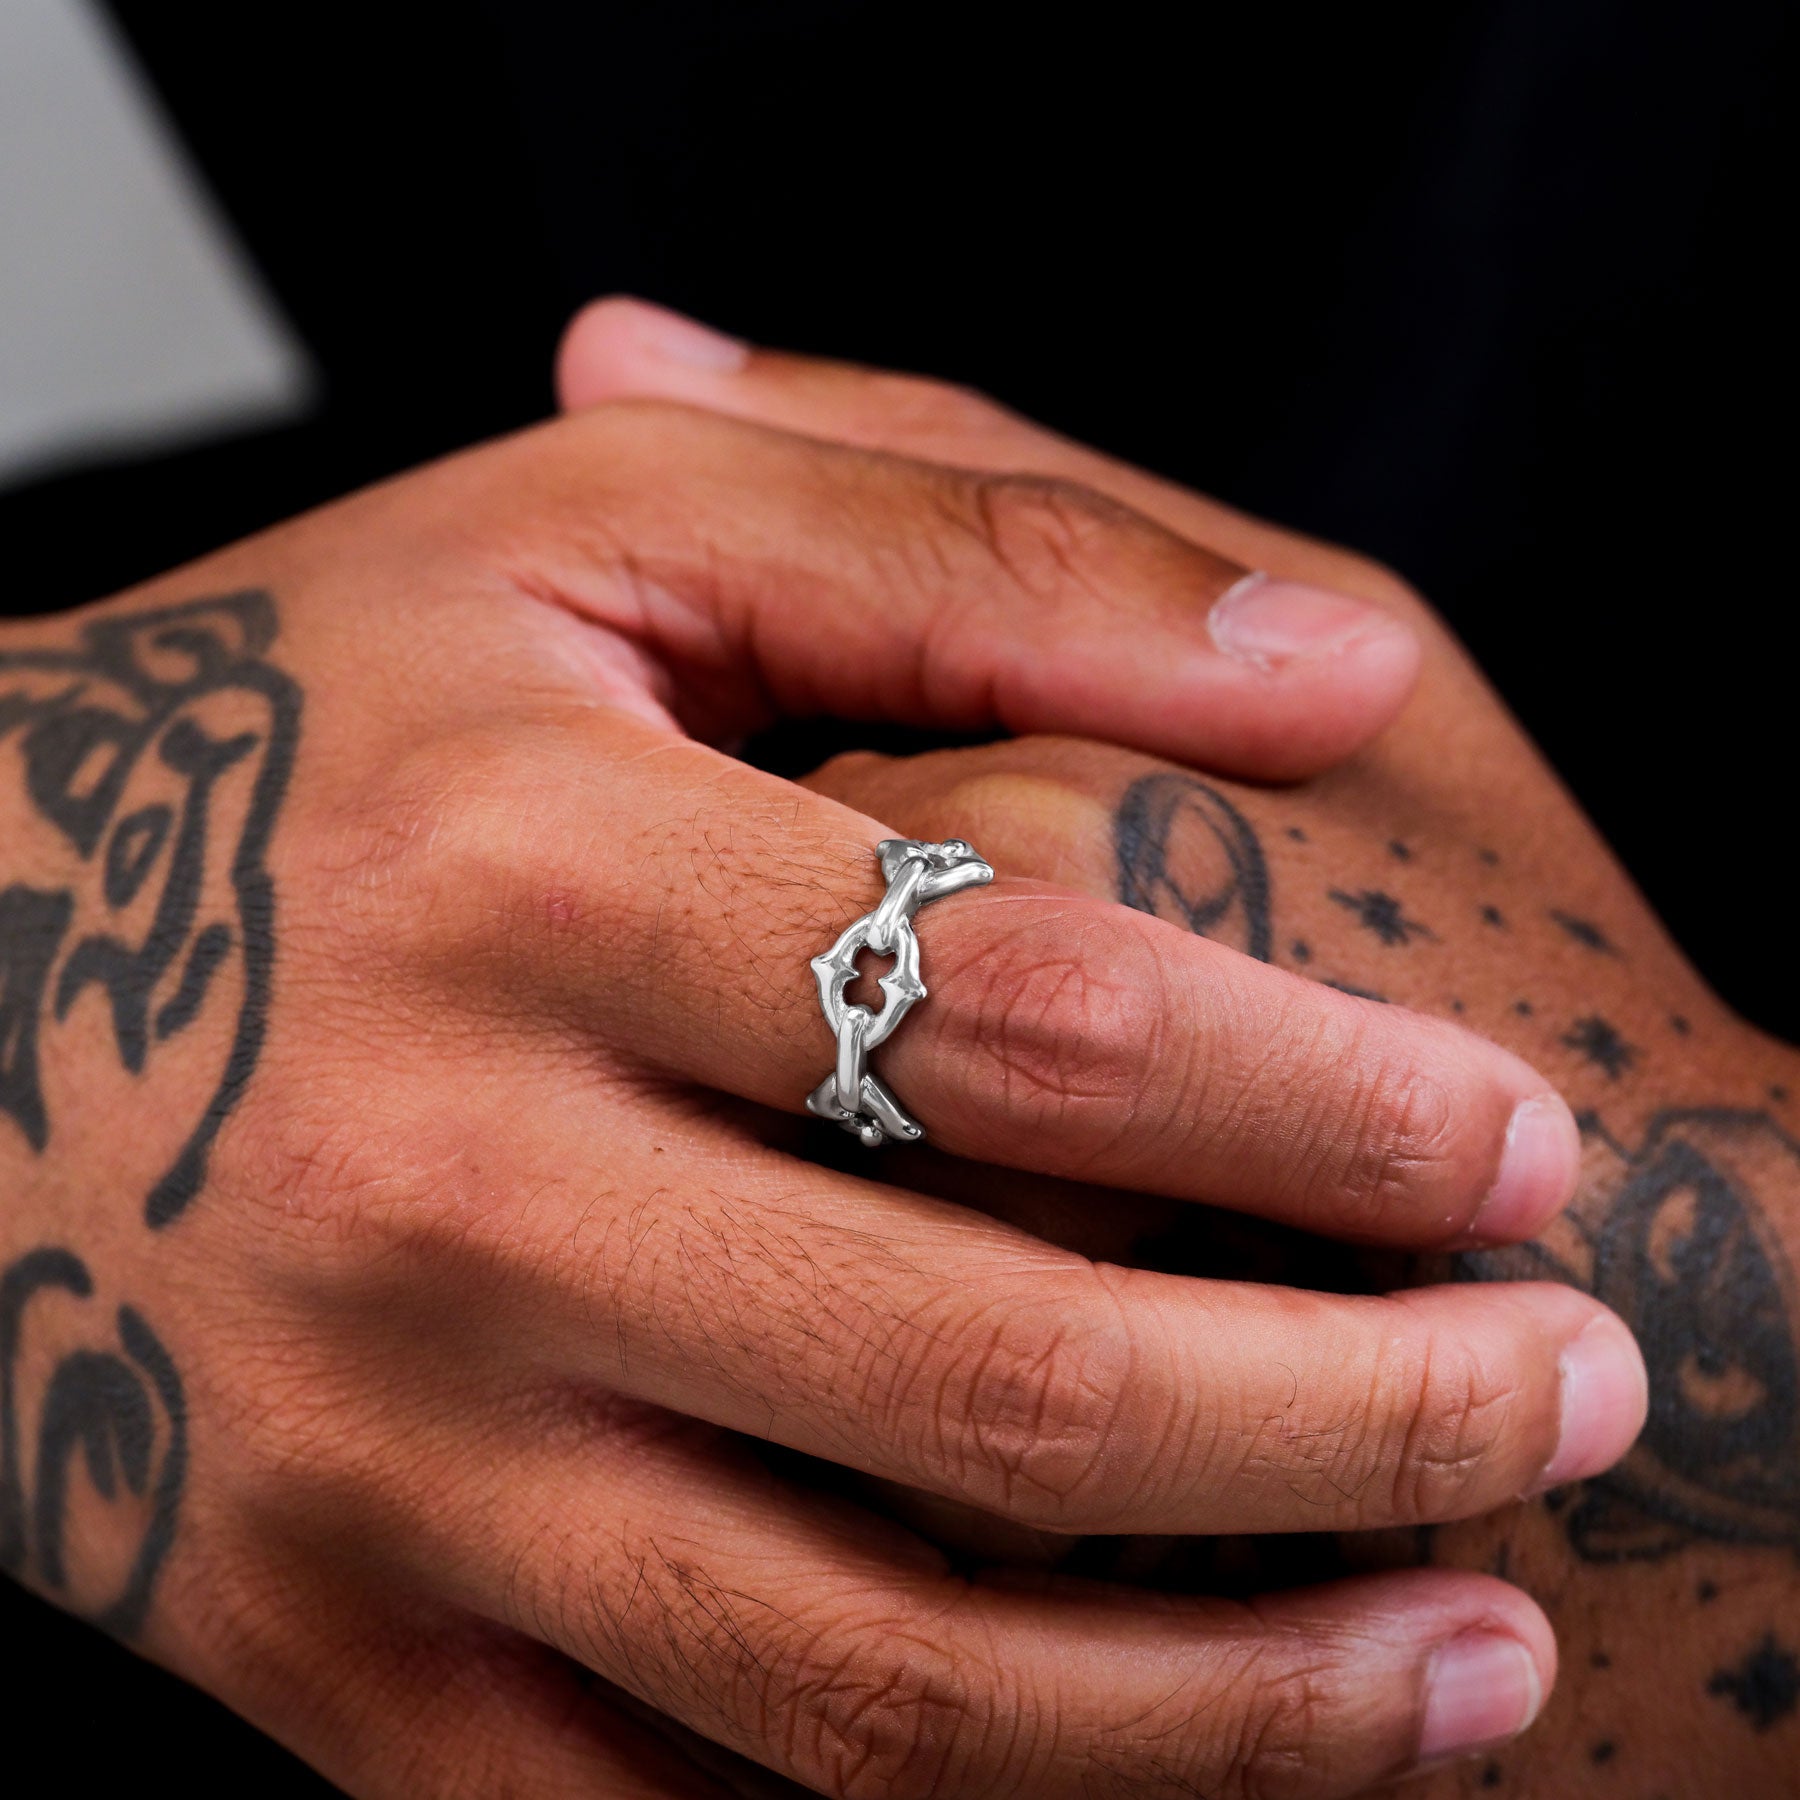 Men's spiked chain ring for punk and alternative style